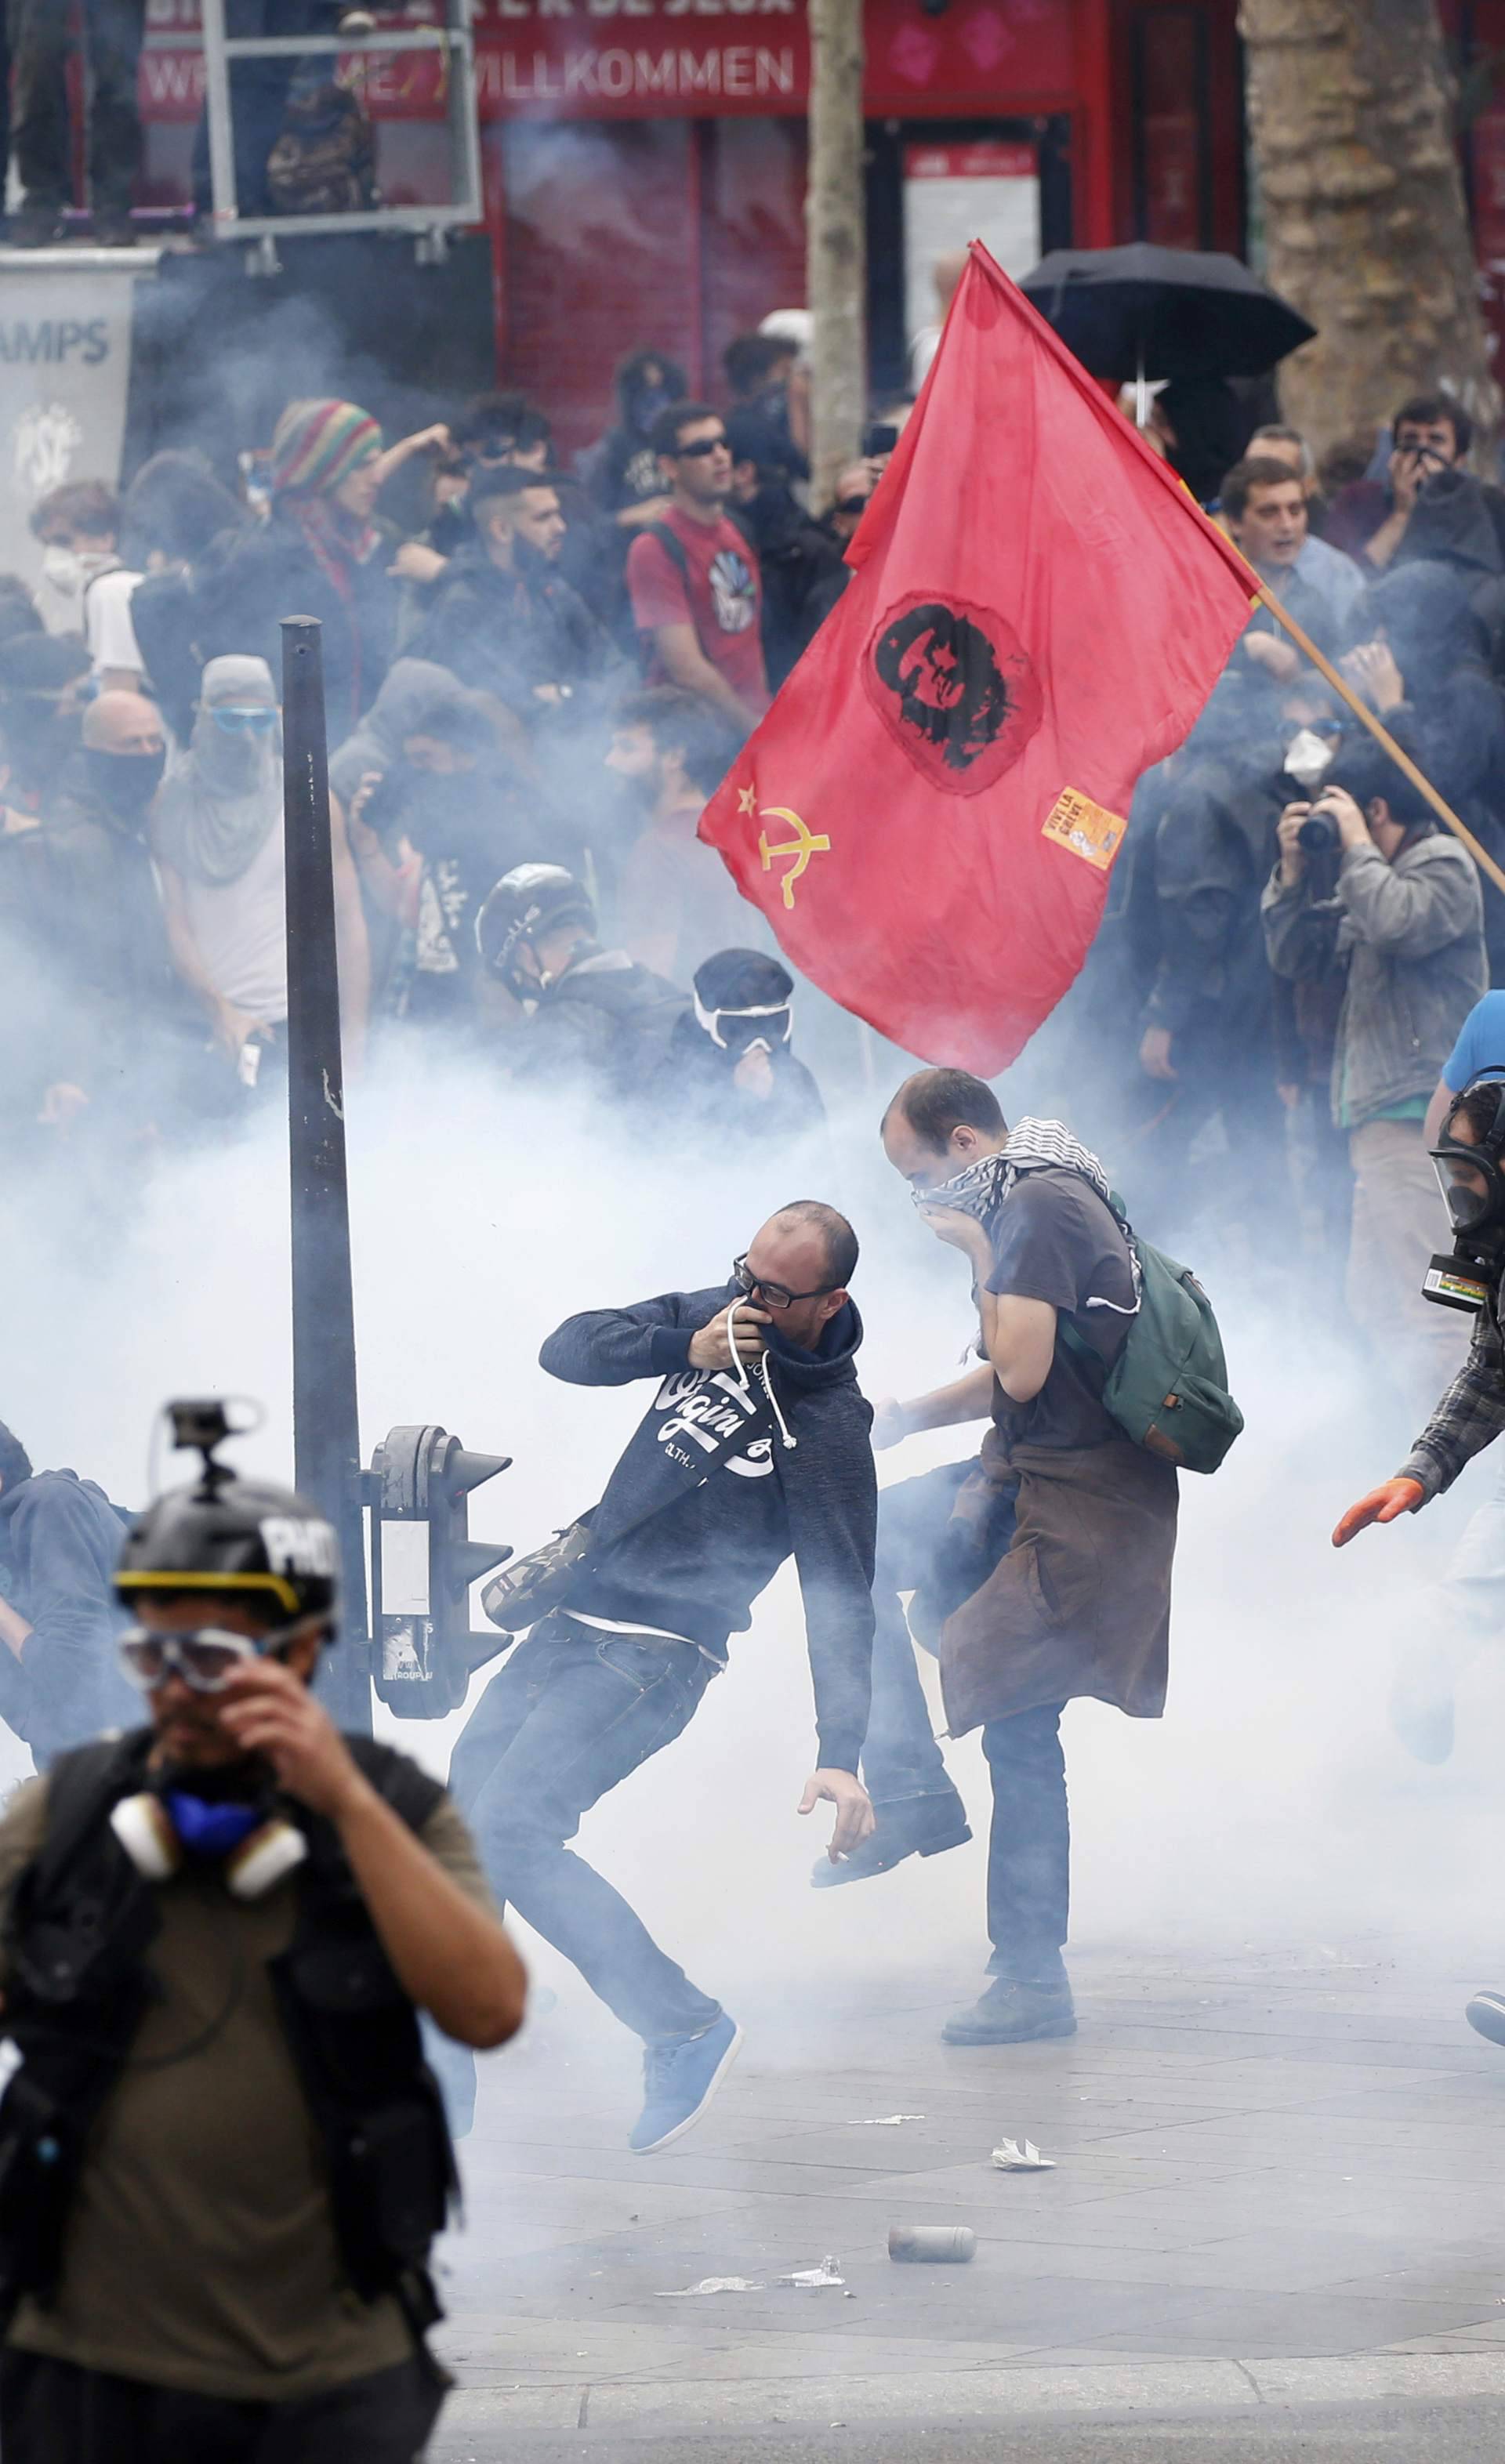 Tear gas fills the air as demonstrators clash with French riot police during a march near the Place de la Republique square in Paris